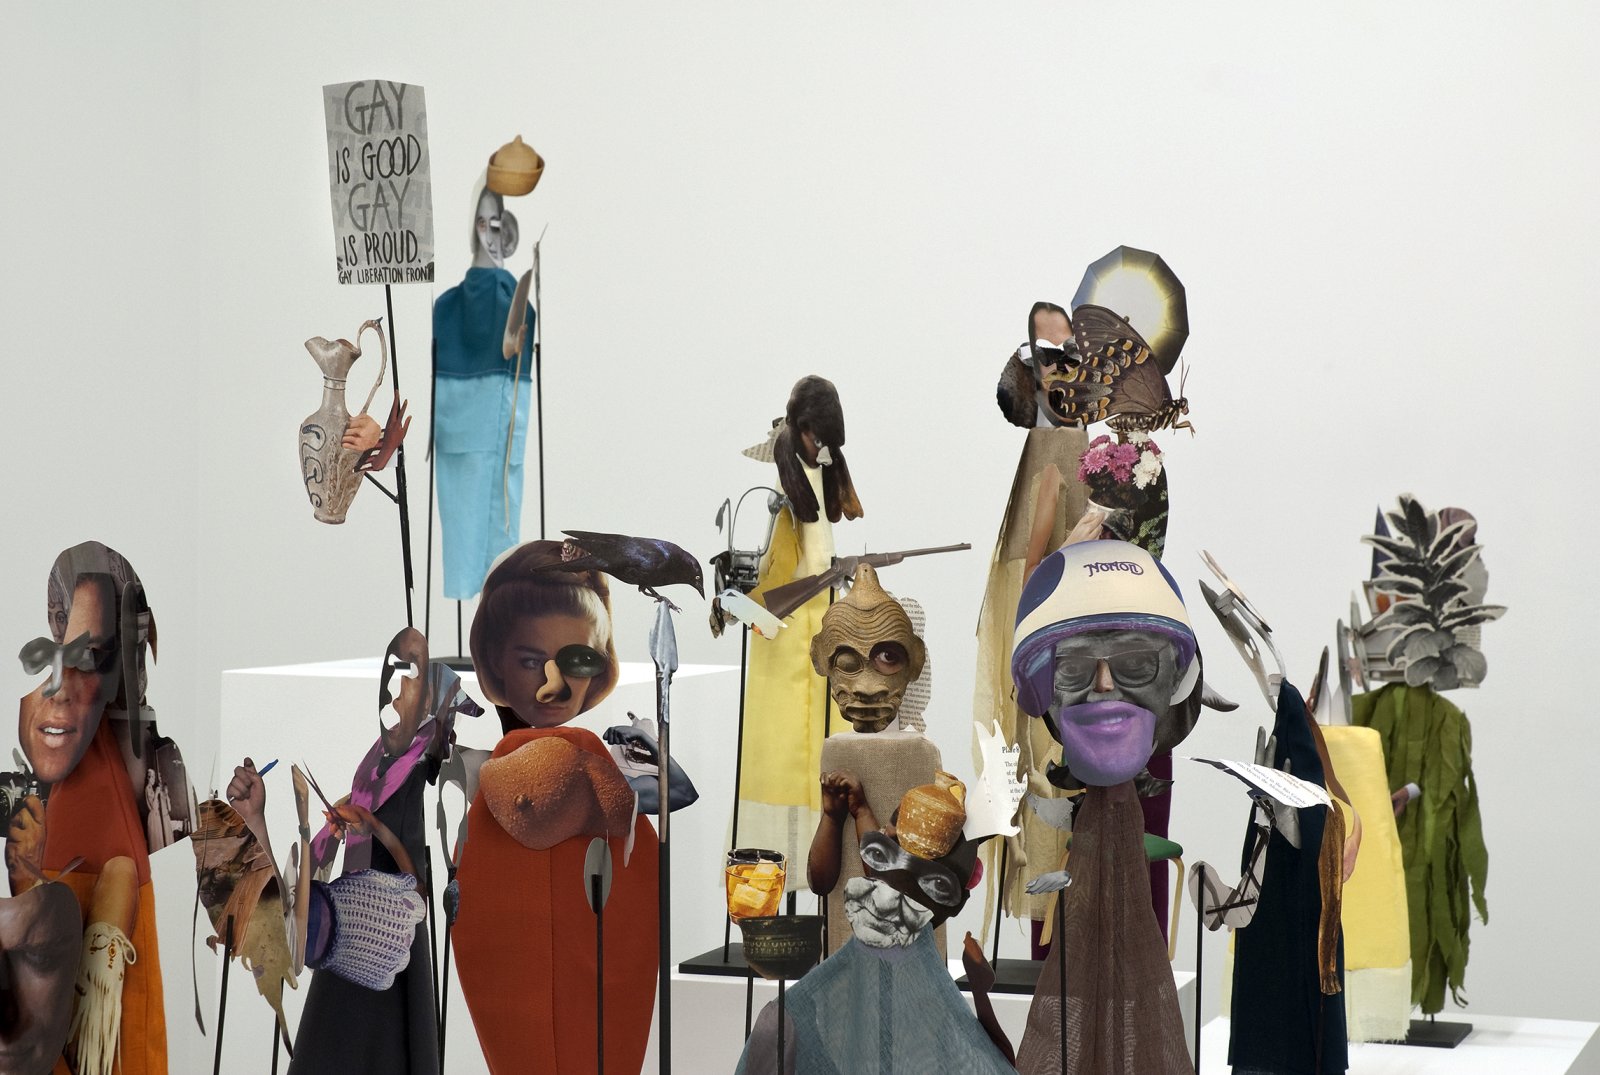 Geoffrey Farmer, The Surgeon and the Photographer, 2009, paper, textile, wood, metal, 365 figures, each figure approximately 18 x 5 x 5 in. (45 x 13 x 13 cm). Installation view, Catriona Jeffries, 2010 by Geoffrey Farmer